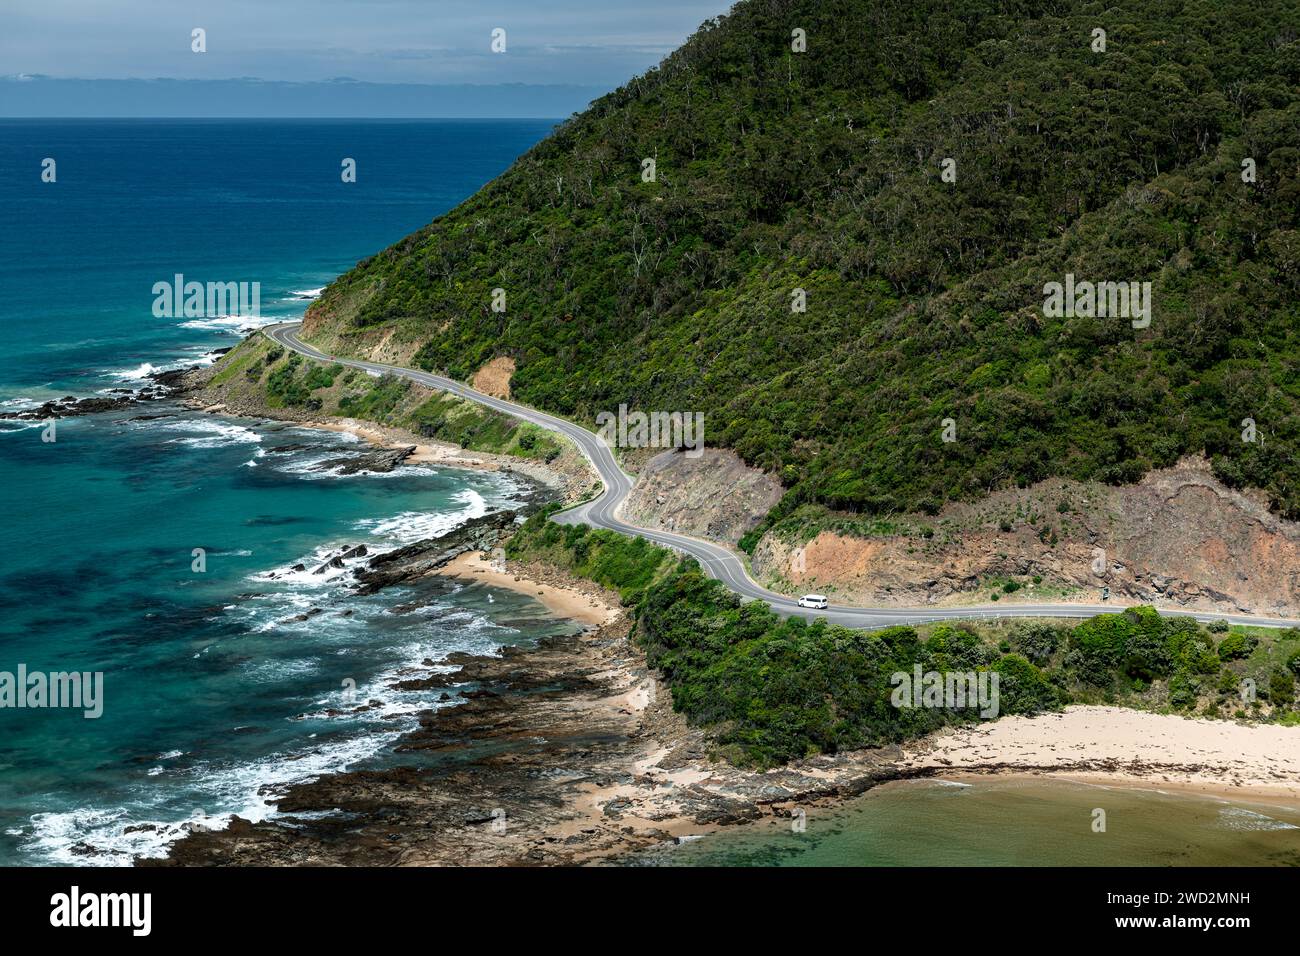 Top view on the famous Great Ocean Road, a scenic drive along Victoria's spectacular coastline. Stock Photo